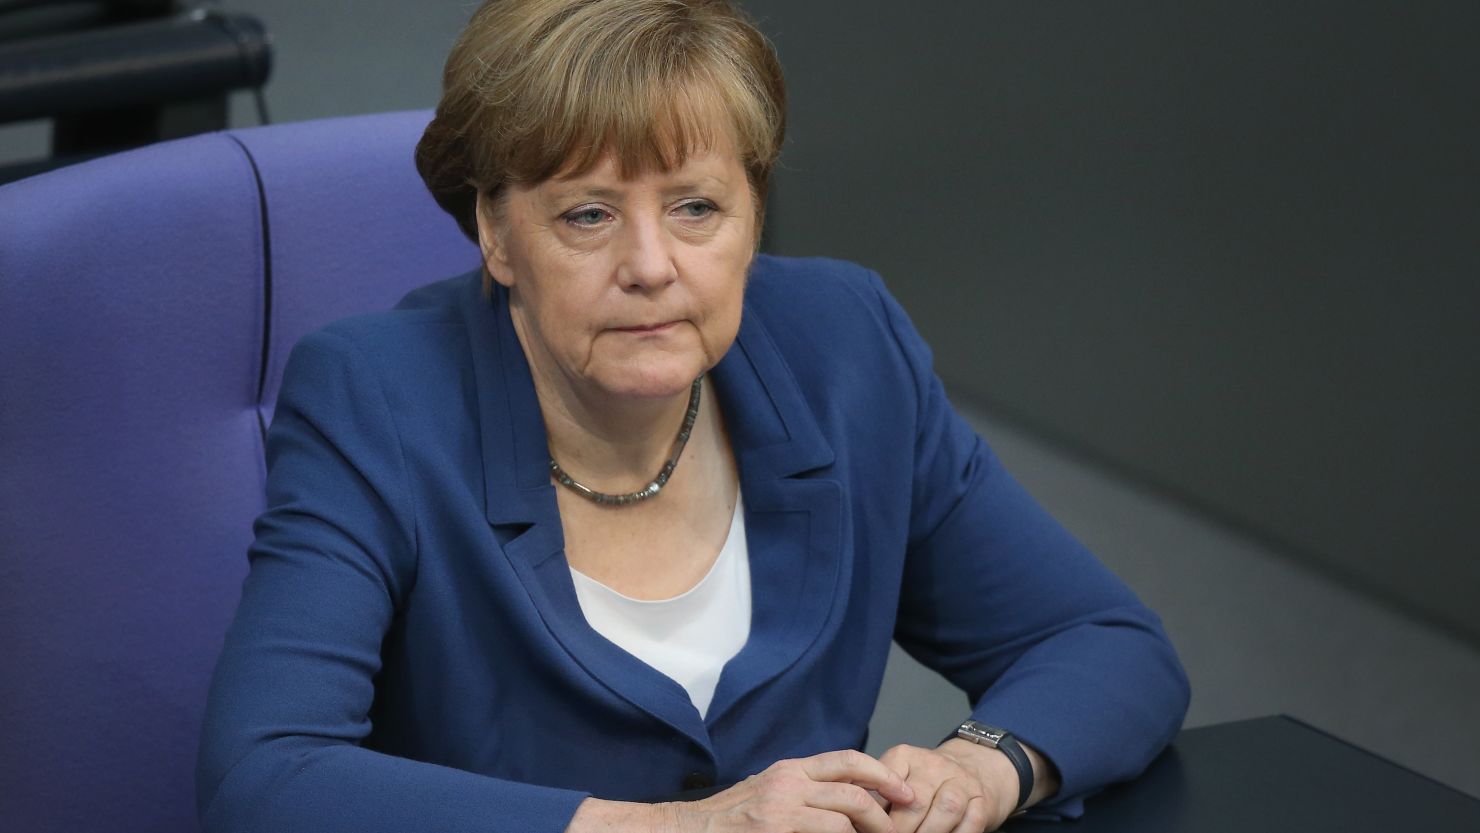 The building that houses German Chancellor Angela Merkel's office was partly closed Wednesday.